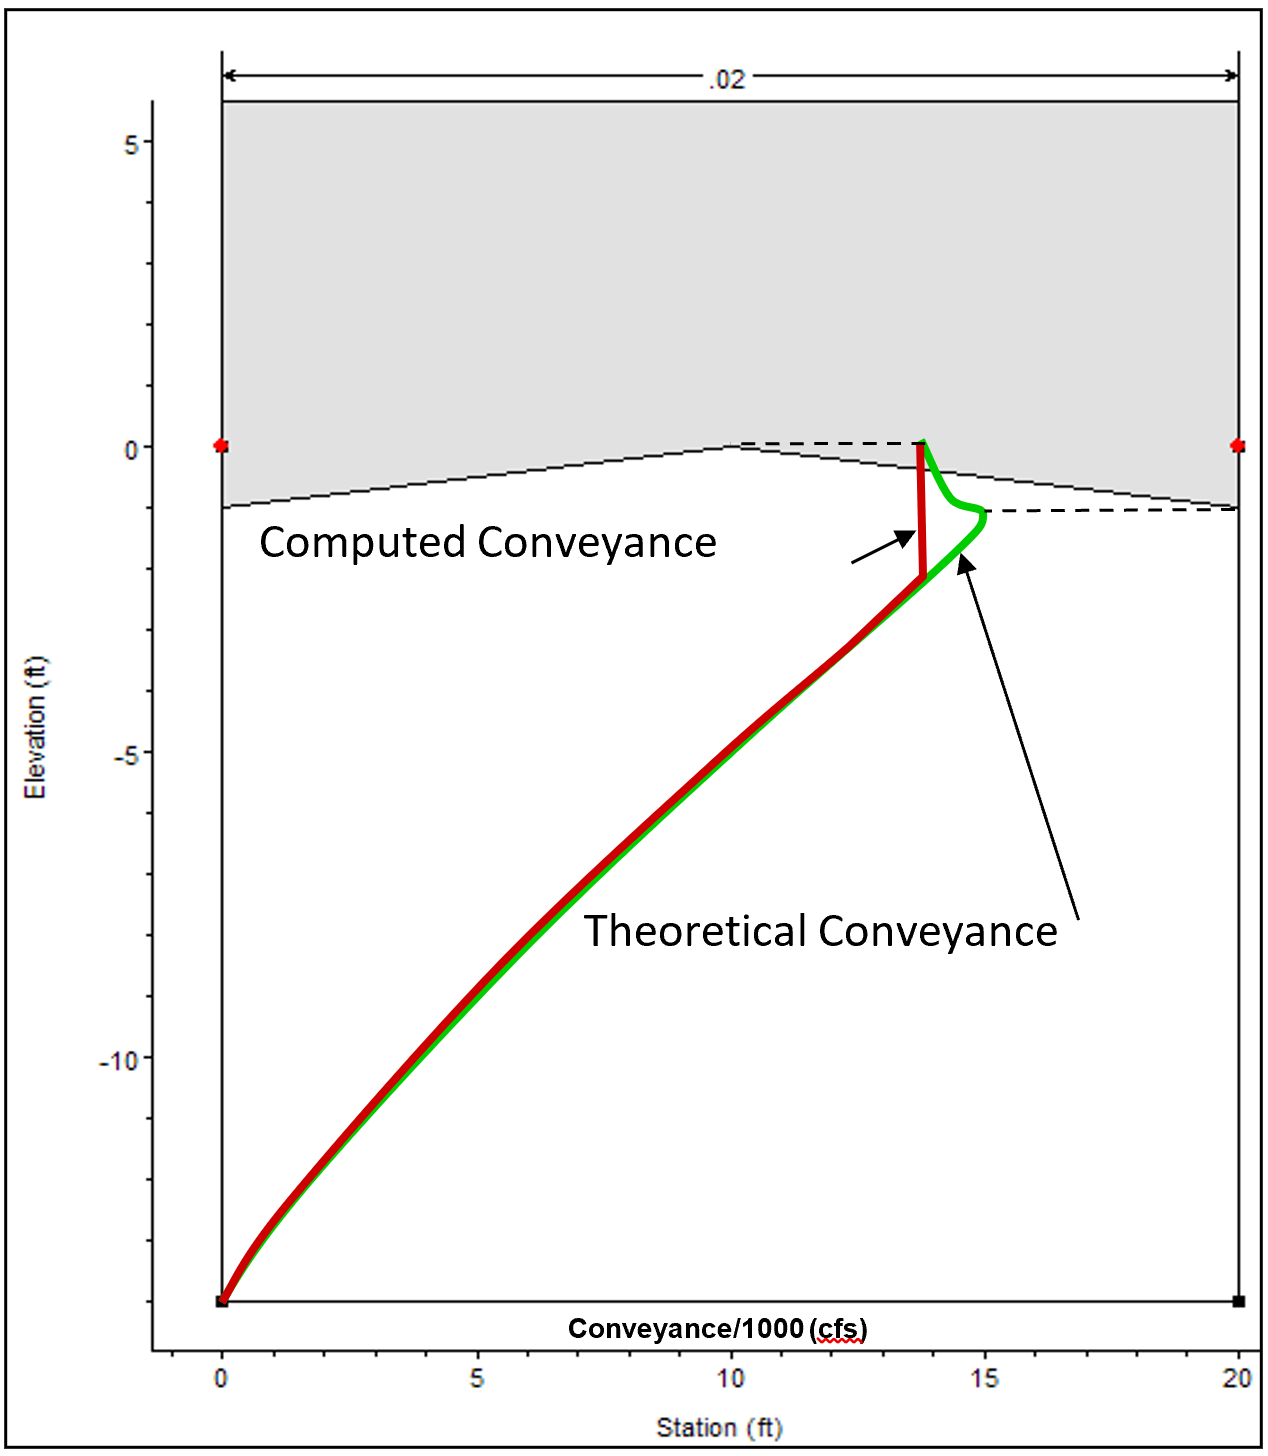 Theoretical and Computed Conveyance